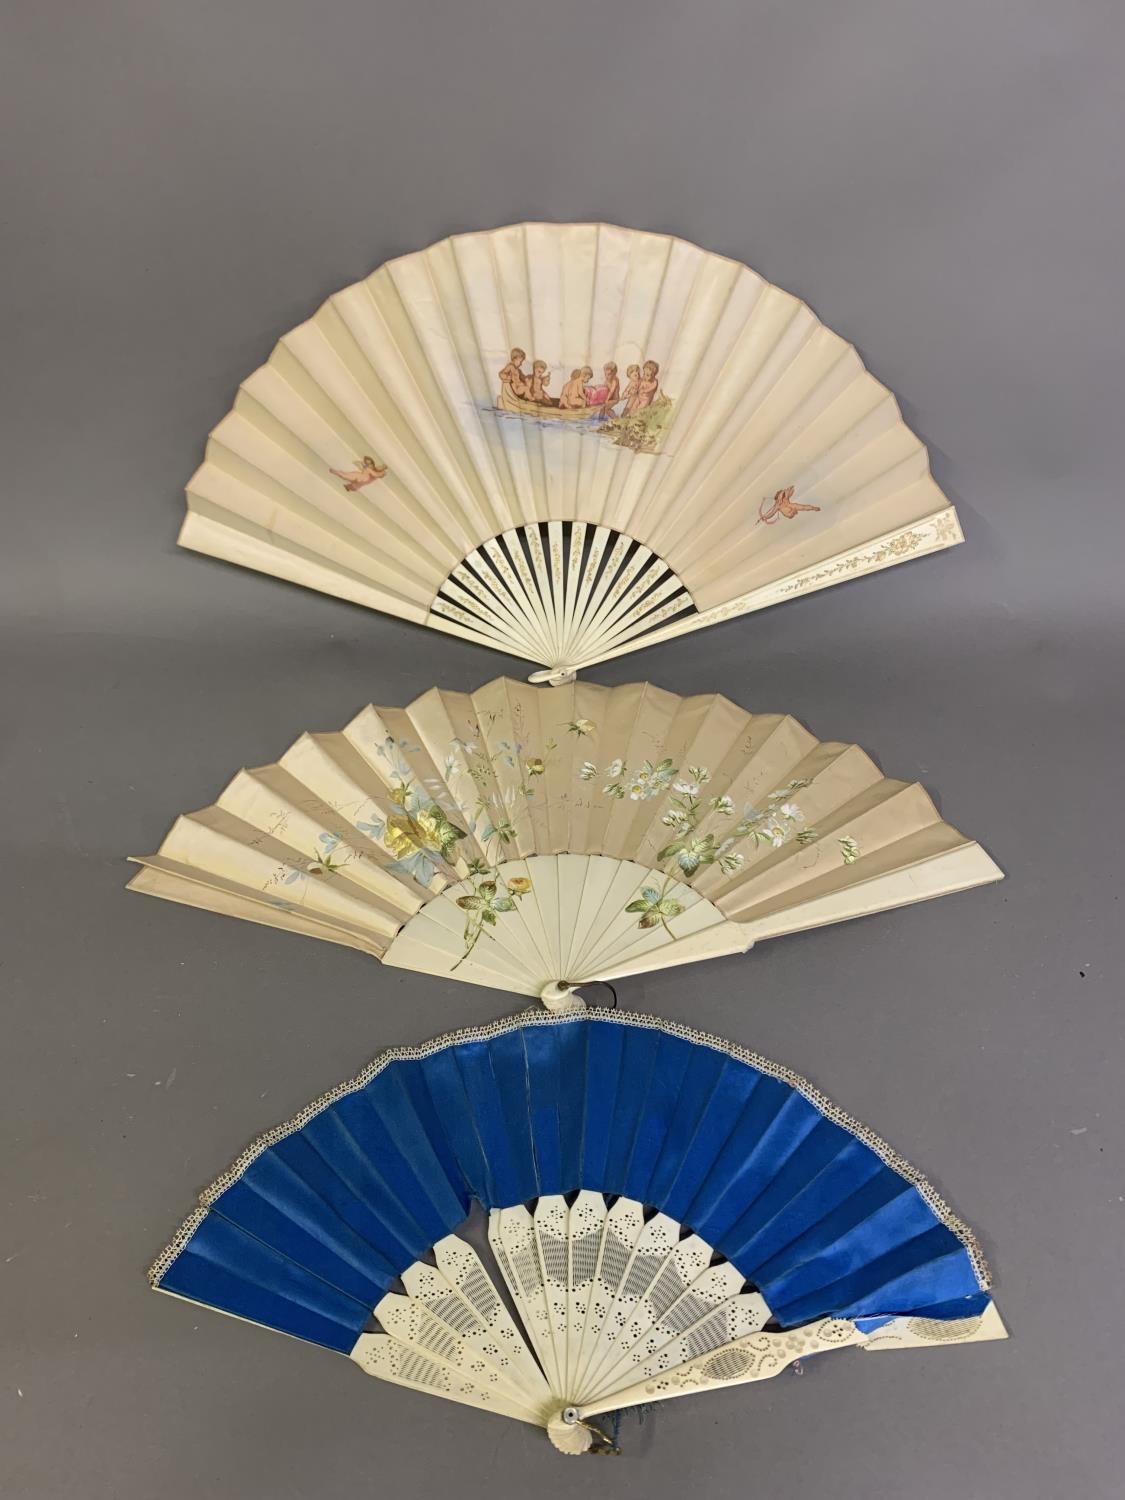 Two cream fans from the 1890’s, the first painted with a gathering of naked cherubs or children on a - Image 2 of 2